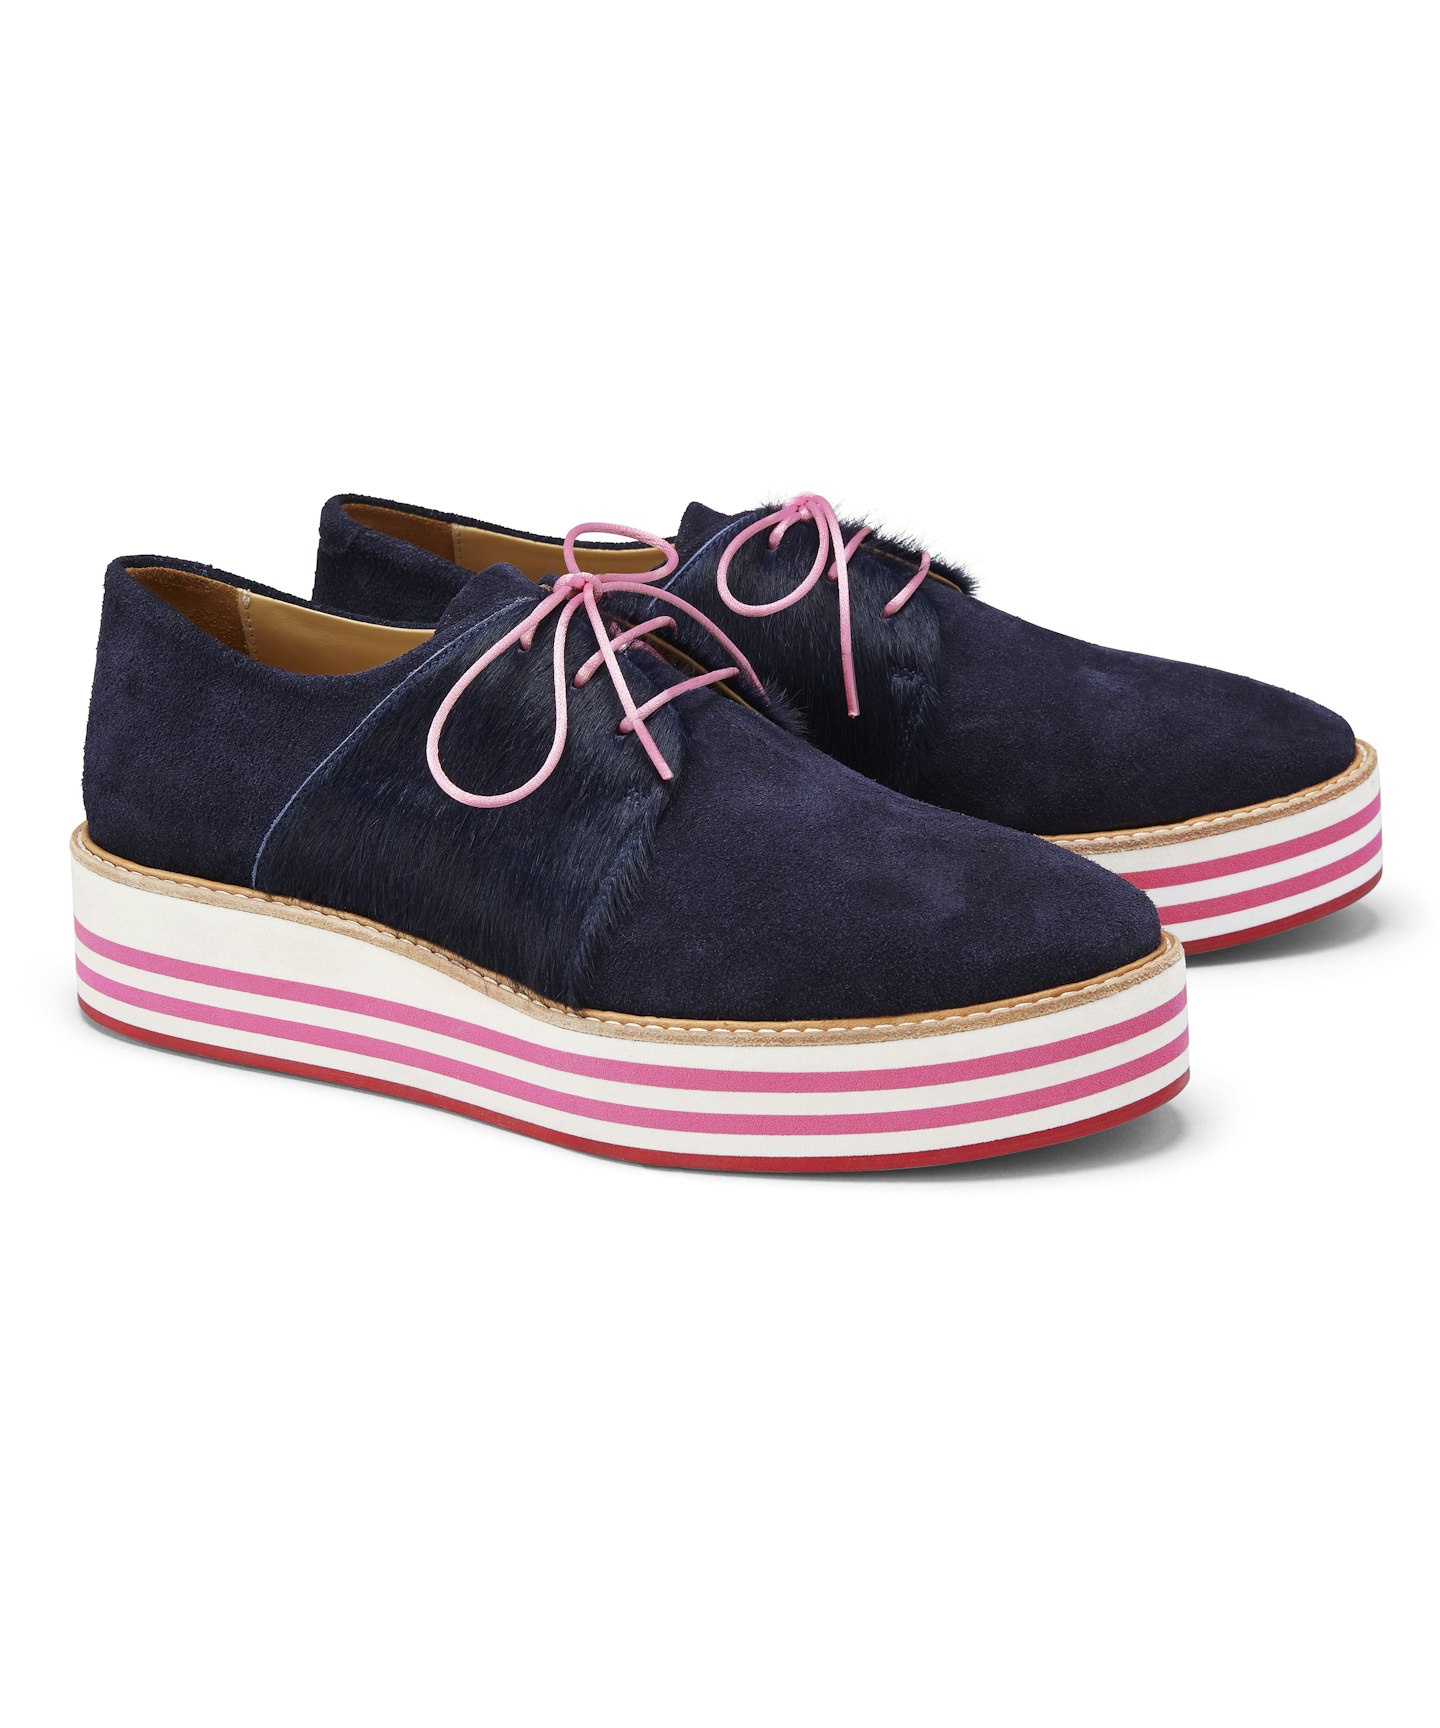 Navy Striped Shoes, £125